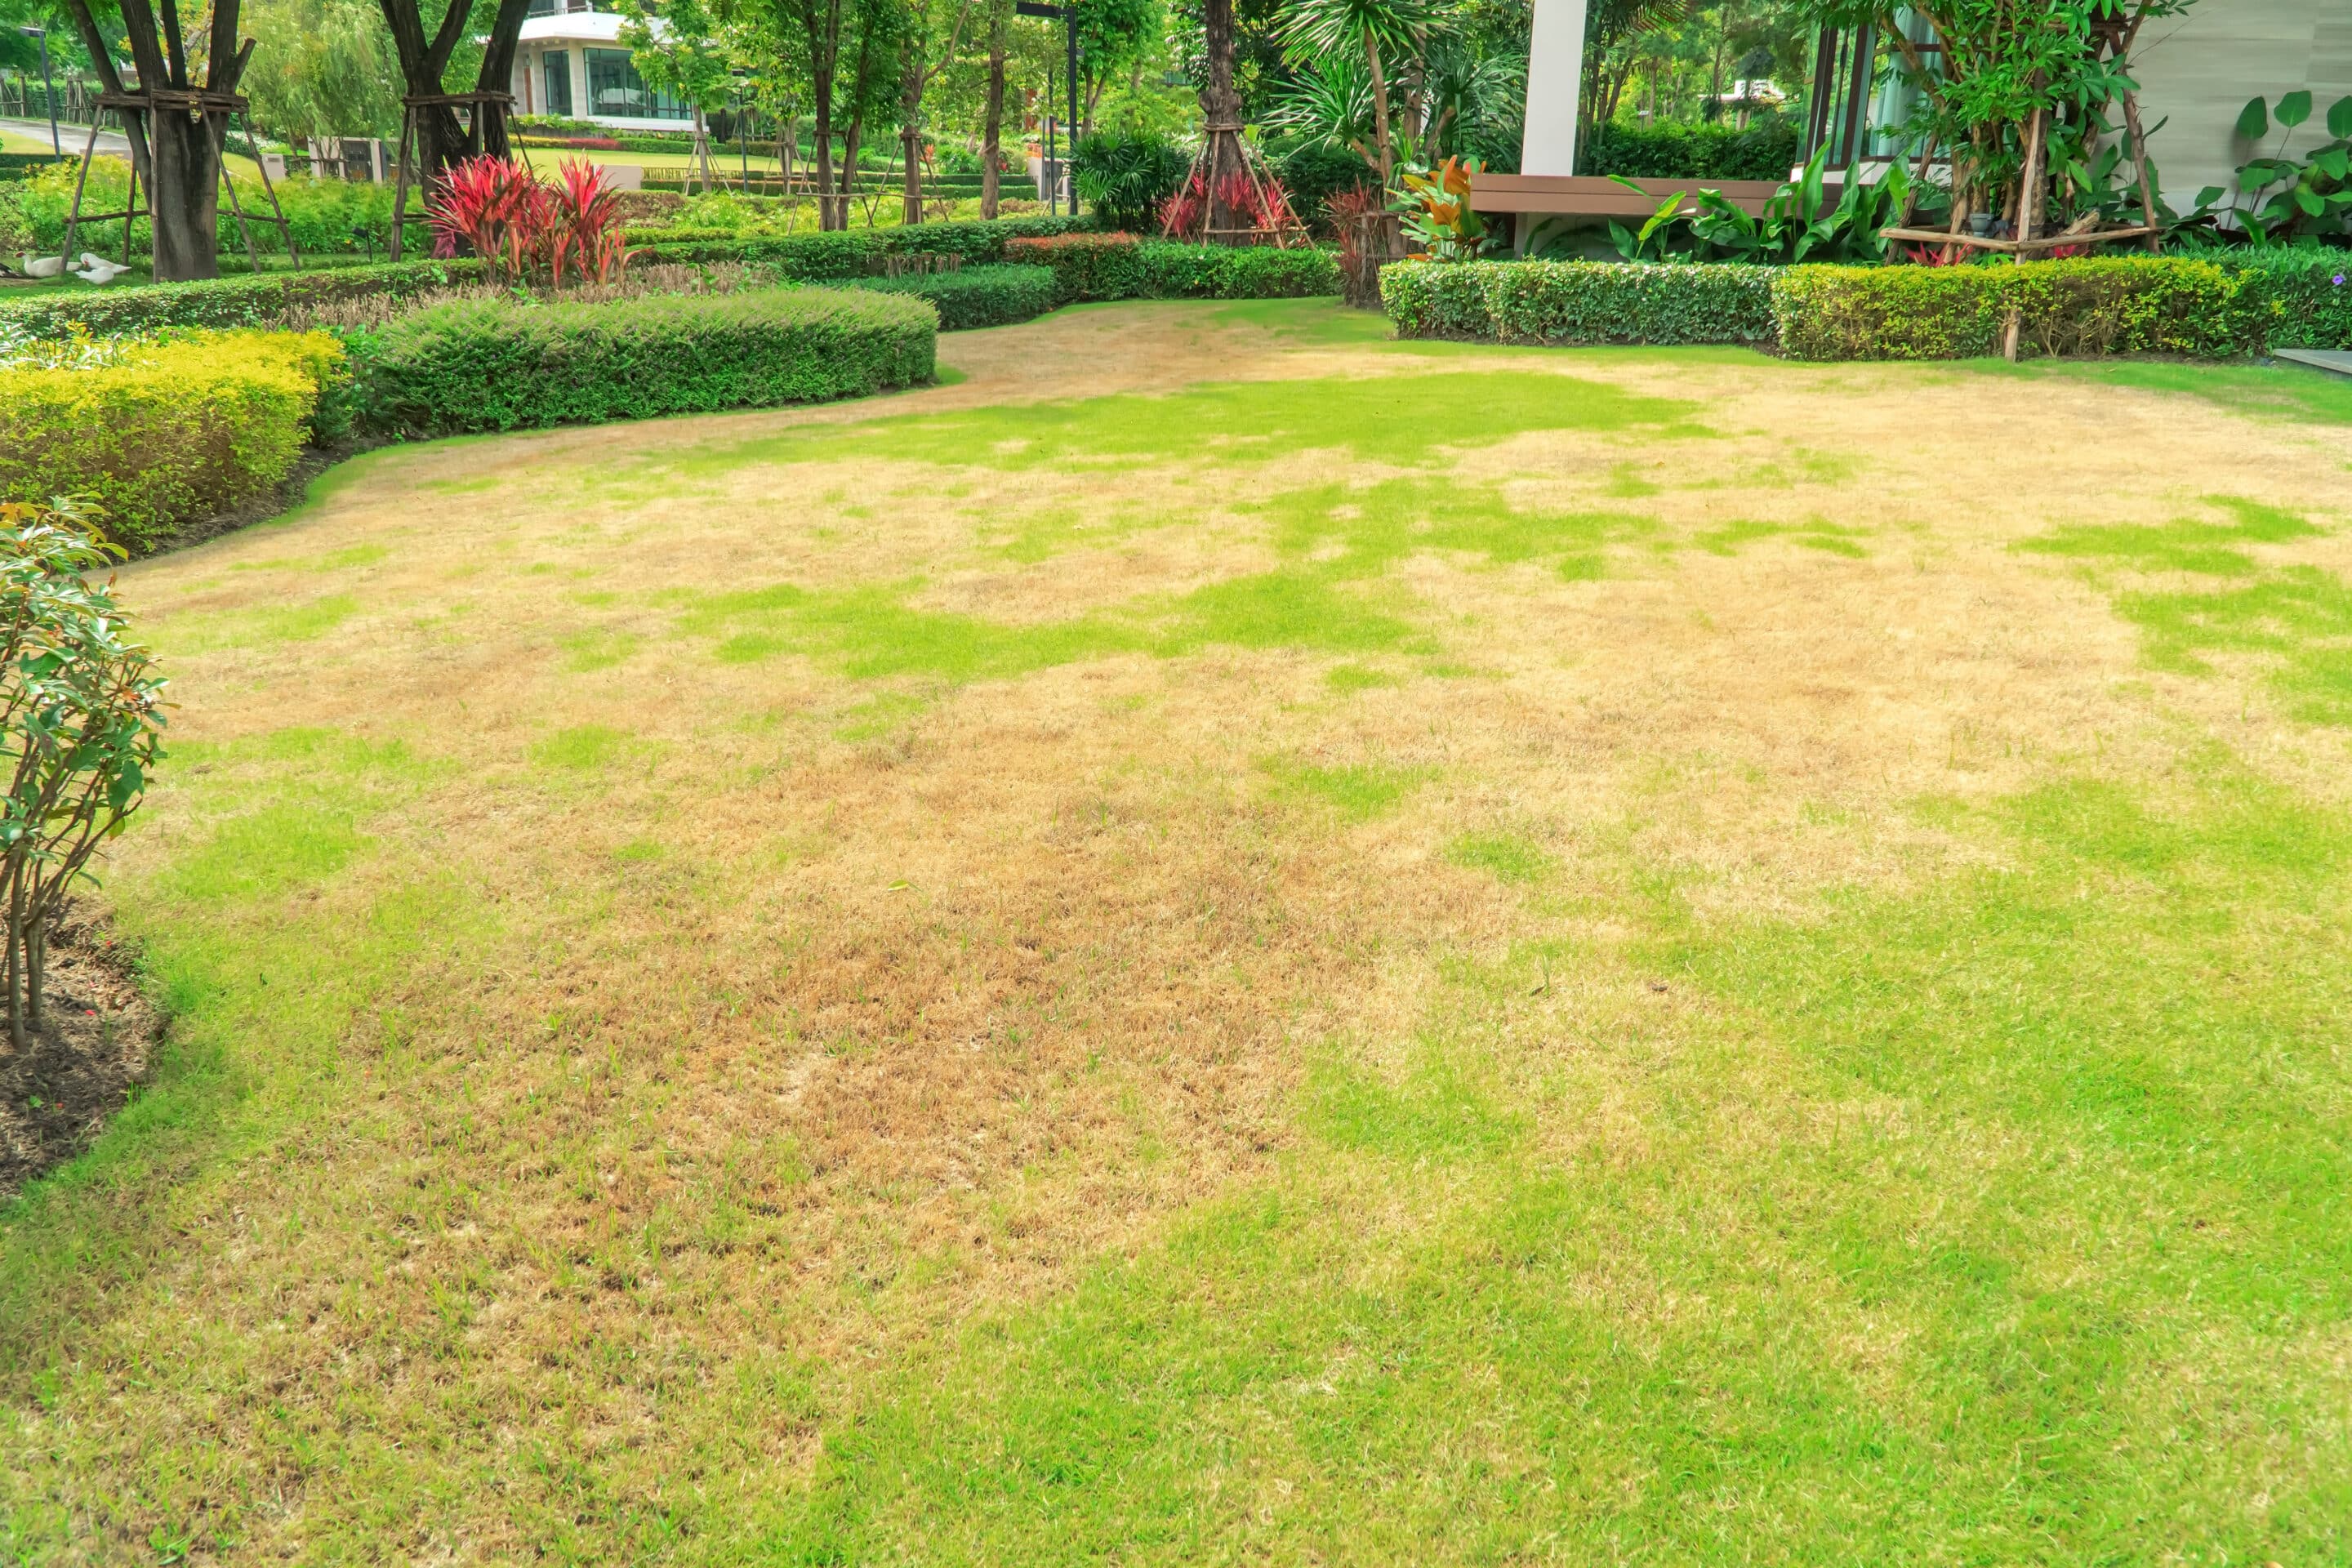 lawn with large patches of burnt out grass from drought conditions - Well Manager